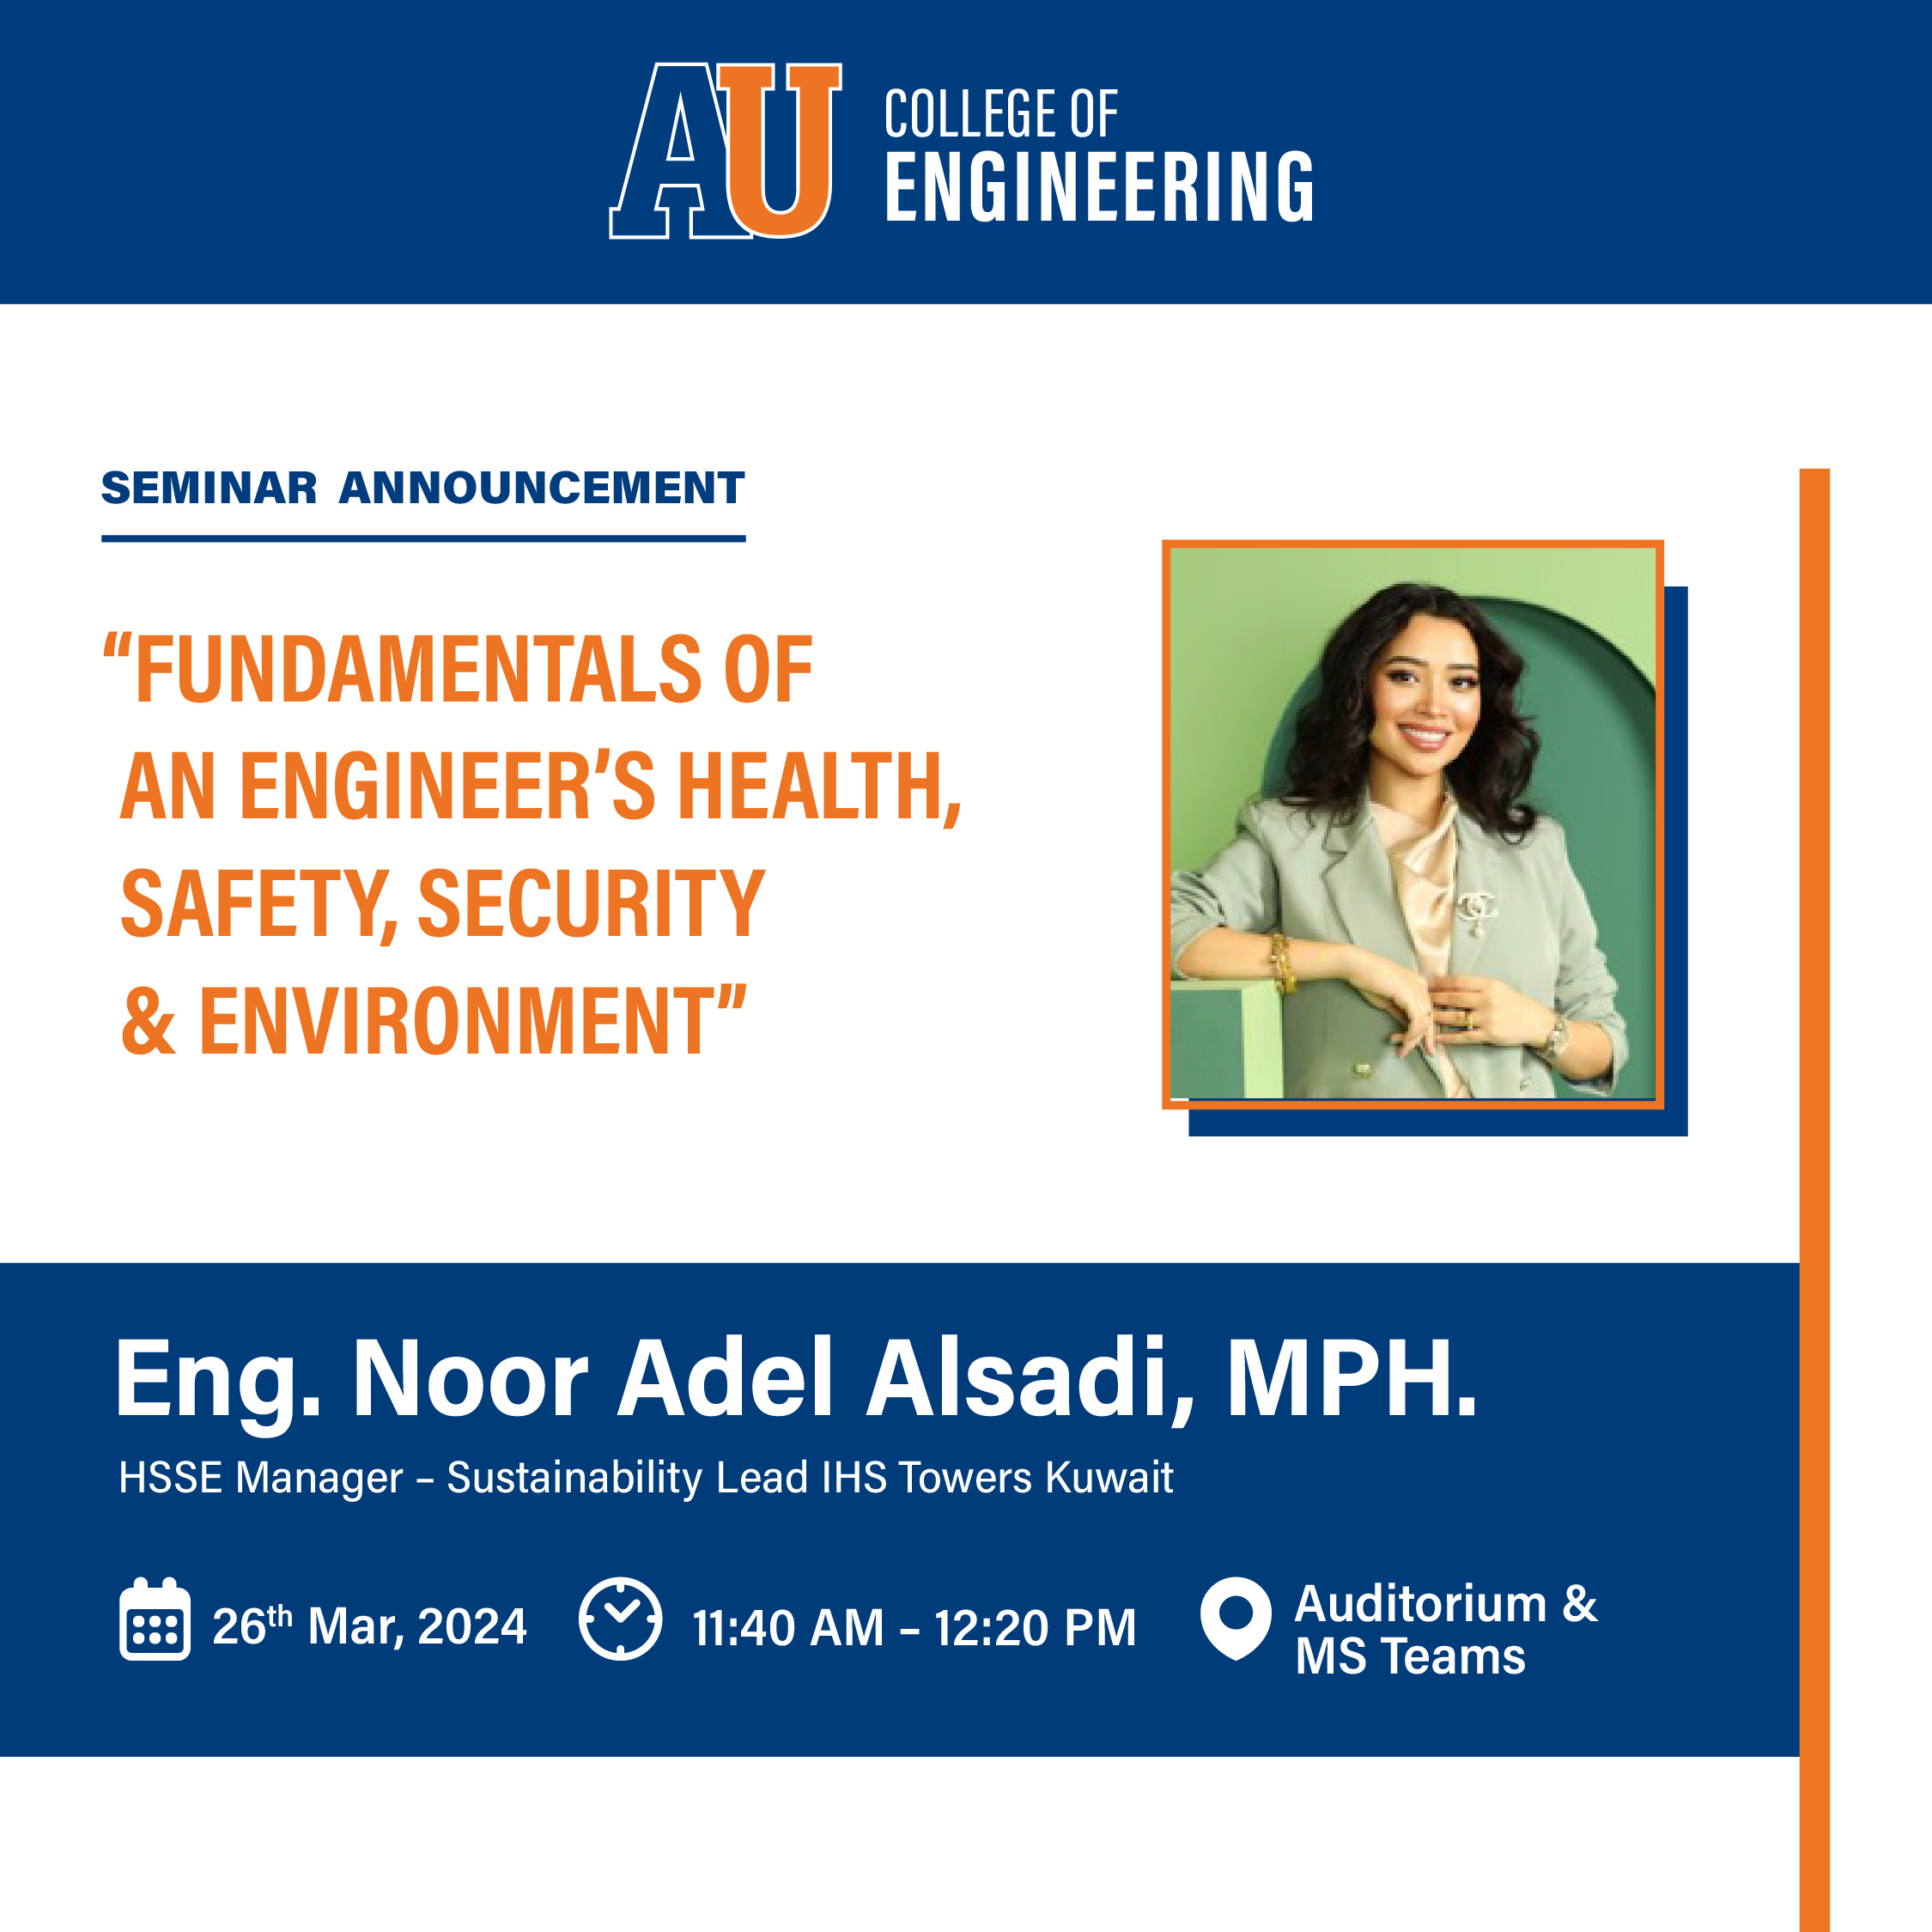 FUNDAMENTALS OF AN ENGINEER'S HEALTH, SAFETY, SECURITY & ENVIRONMENT